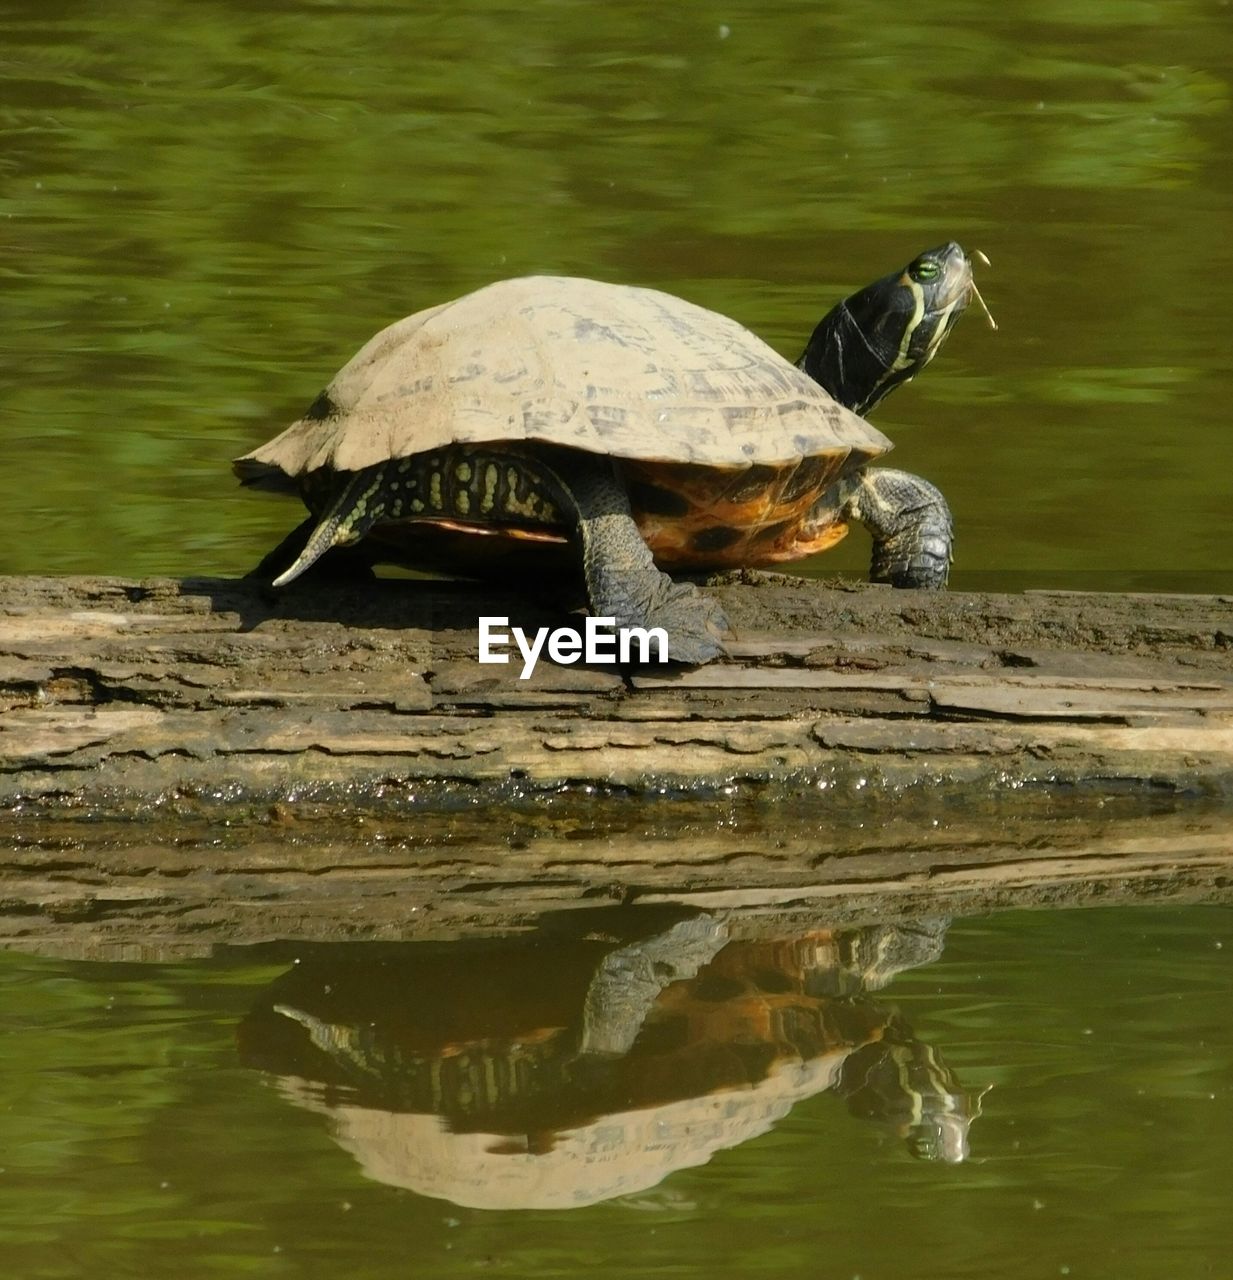 TURTLE IN A LAKE